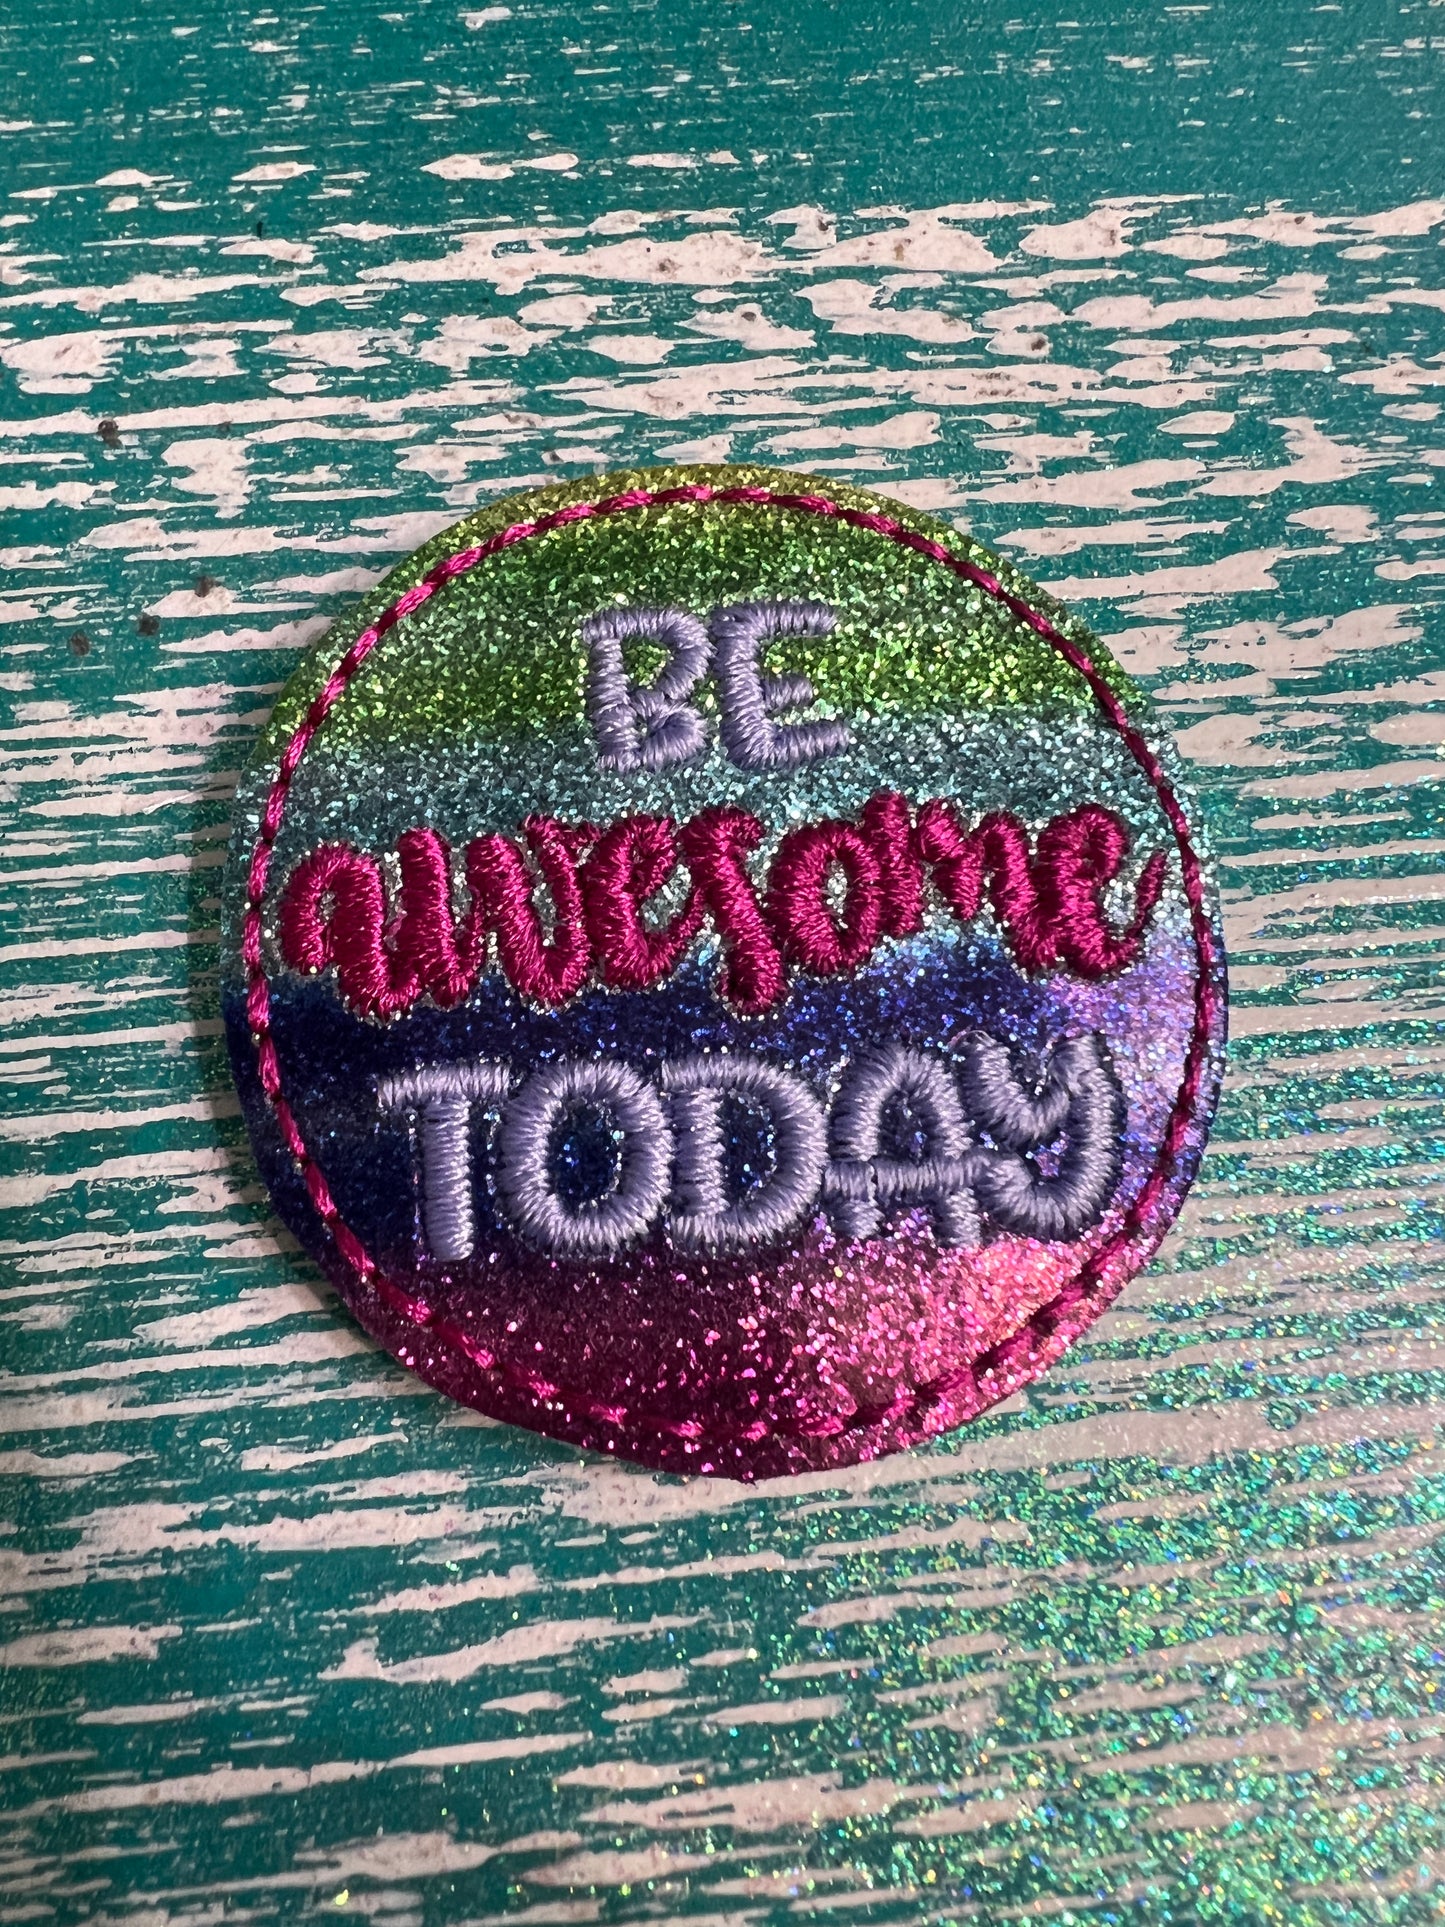 Be awesome